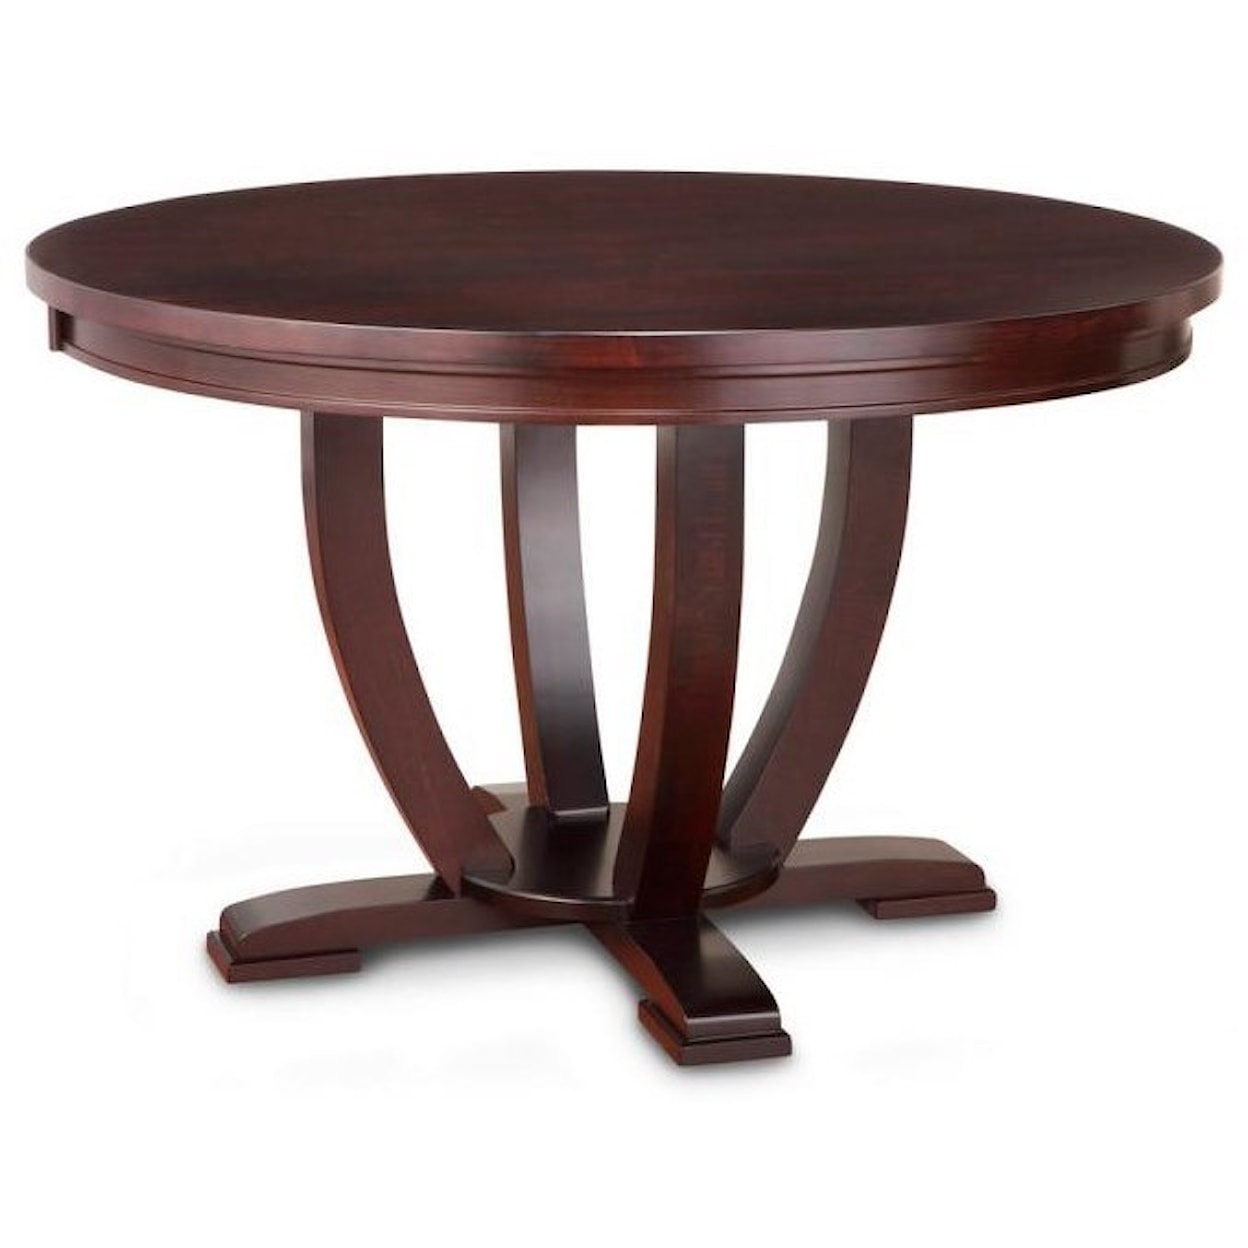 Handstone Florence 42" Solid Top Round Dining Table